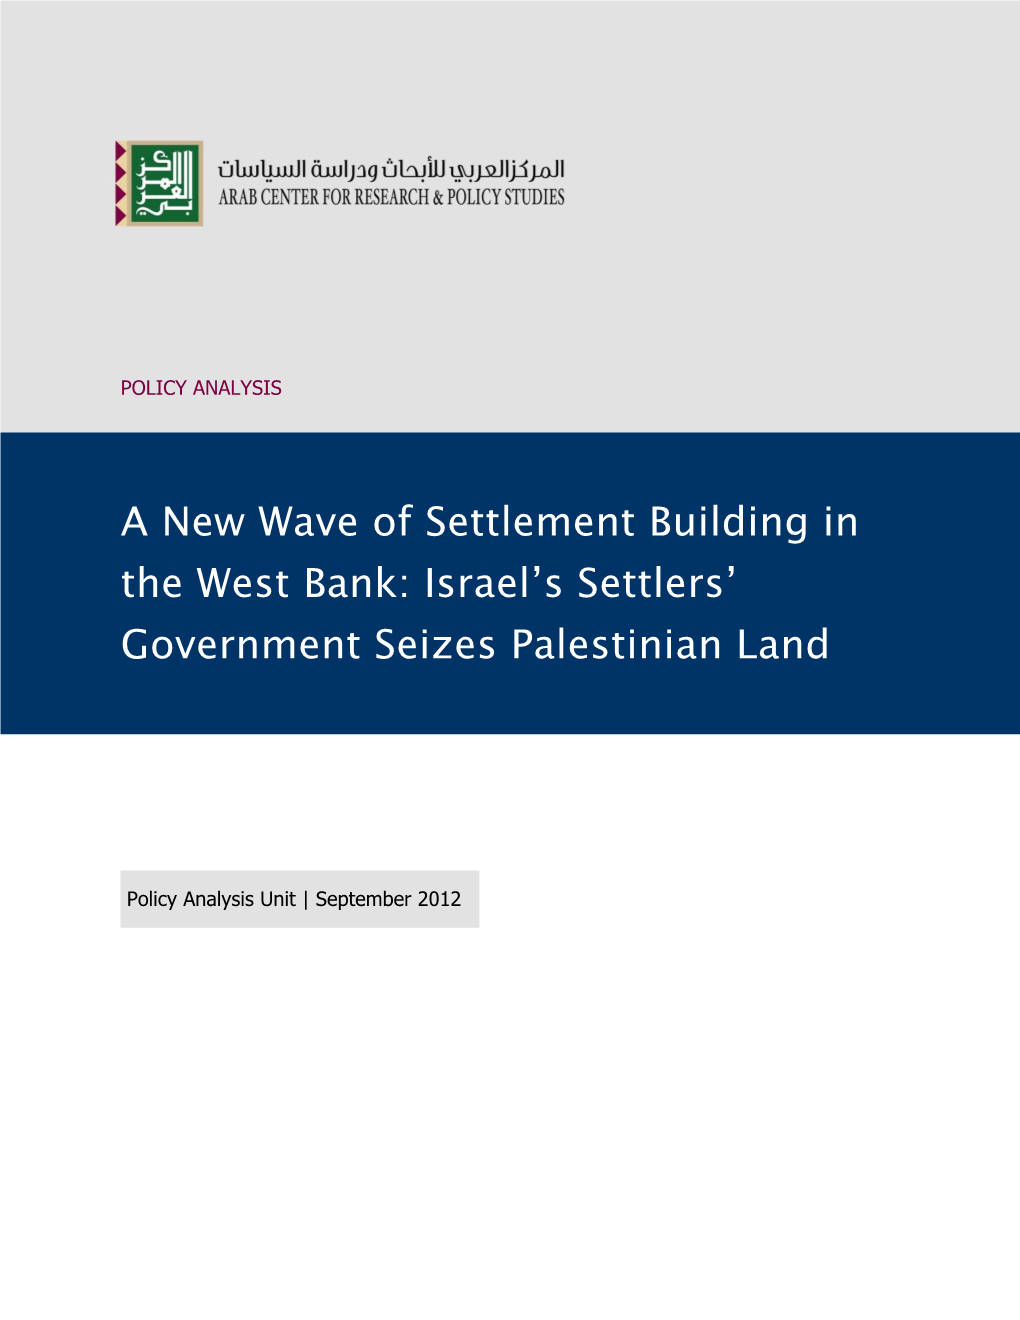 A New Wave of Settlement Building in the West Bank: Israel's Settlers